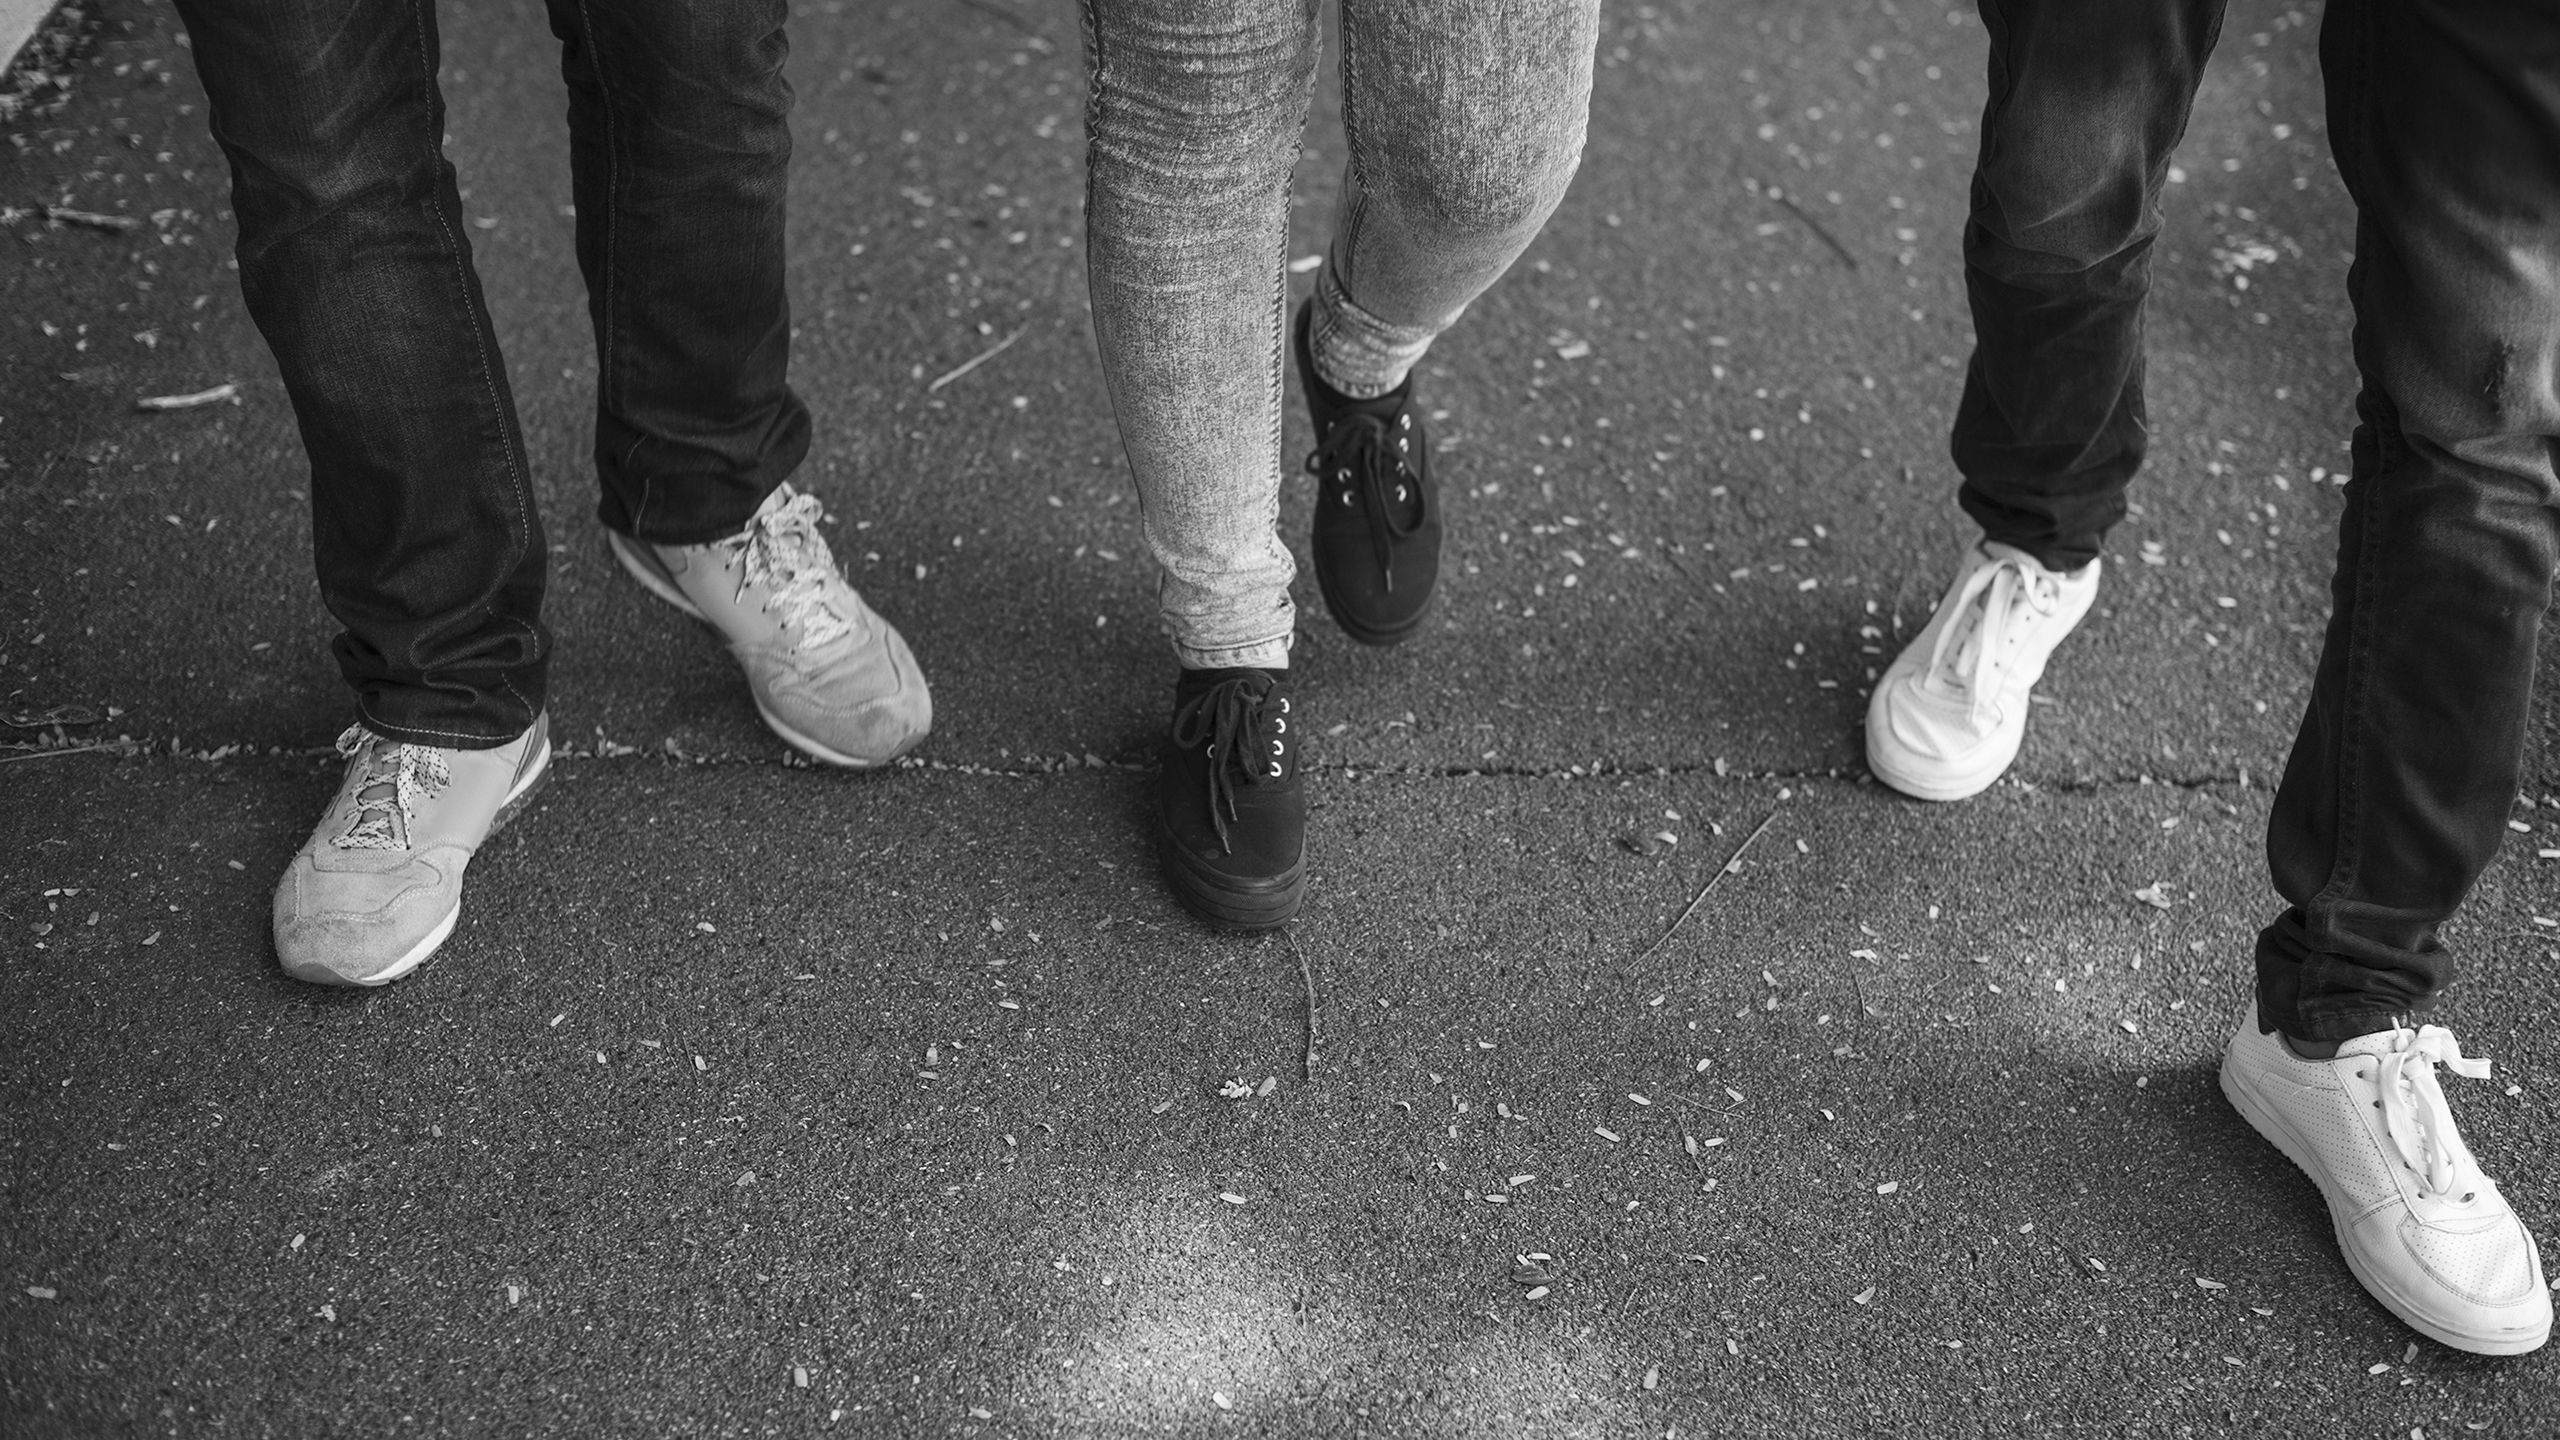 Teens hanging out on the street in jeans and sneakers.